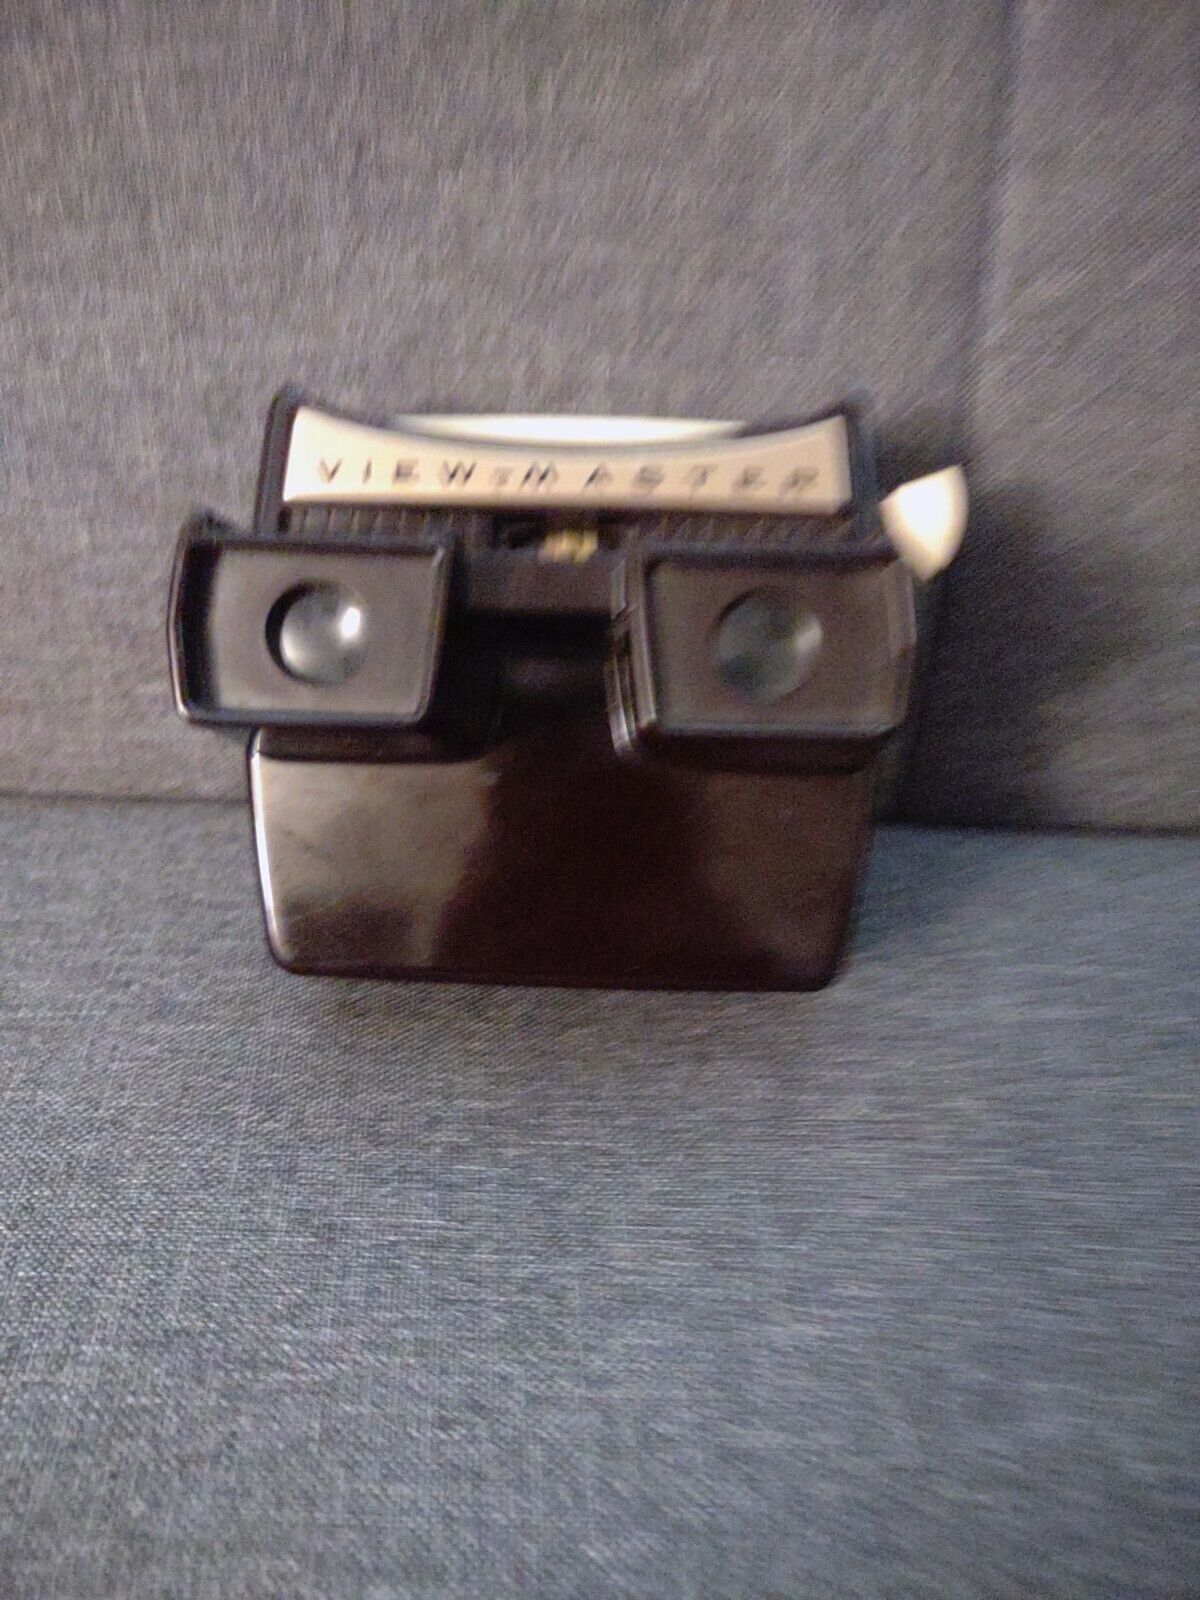 VTG Sawyer's Viewmaster Lighted Stereo Viewer View Master Brown Bakelite 50's